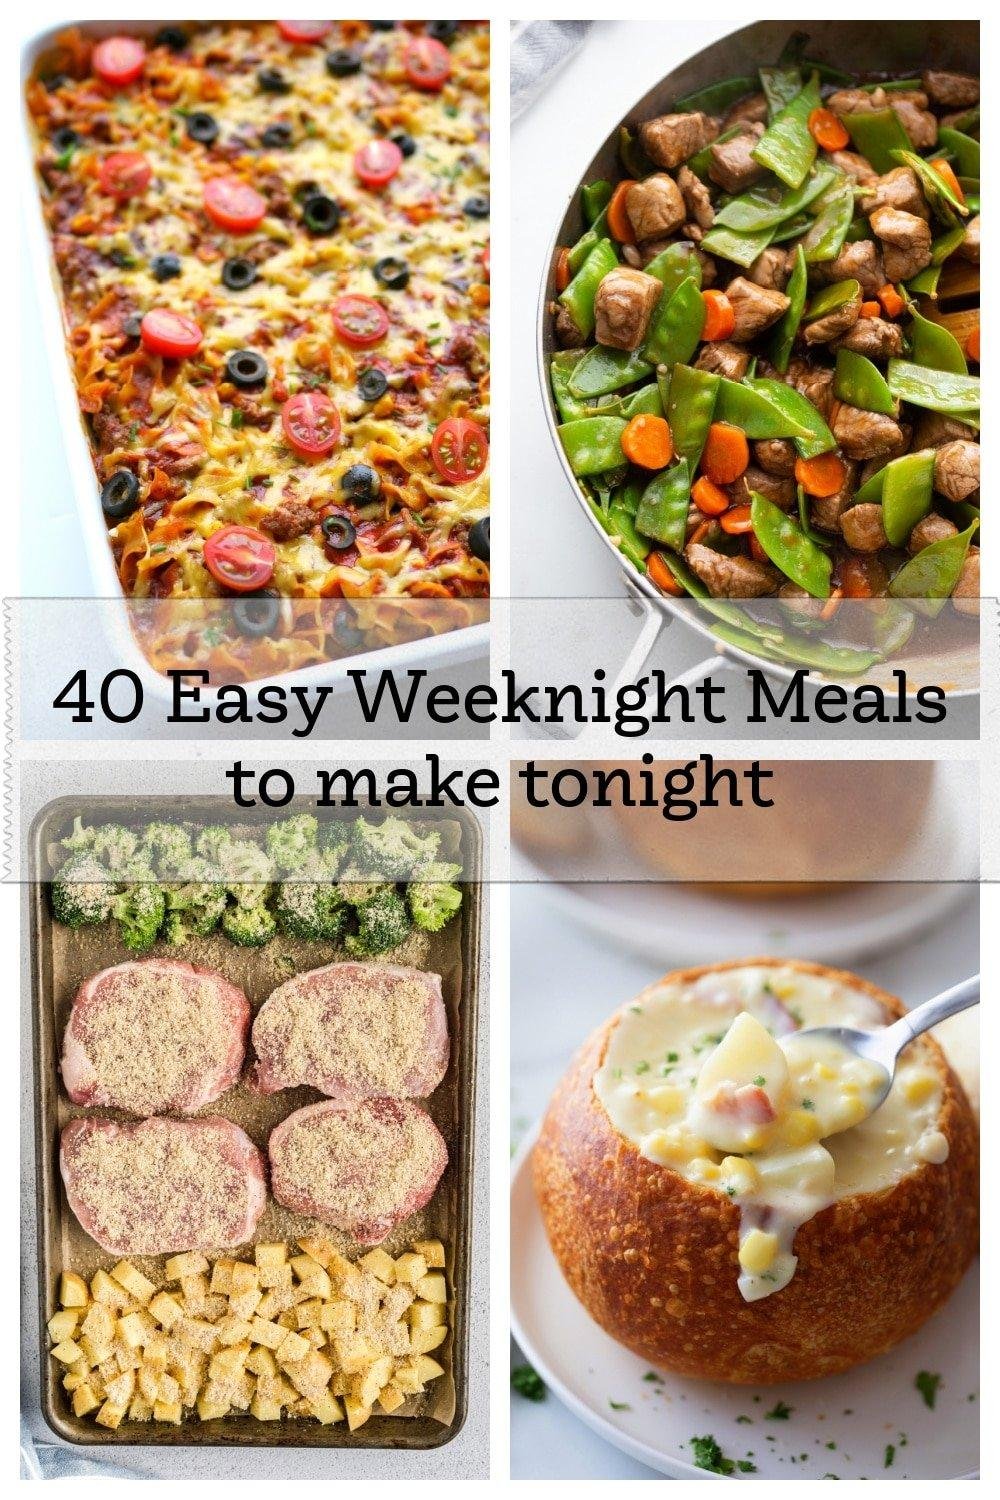 10 Delicious and Easy Weeknight Dinner Recipes